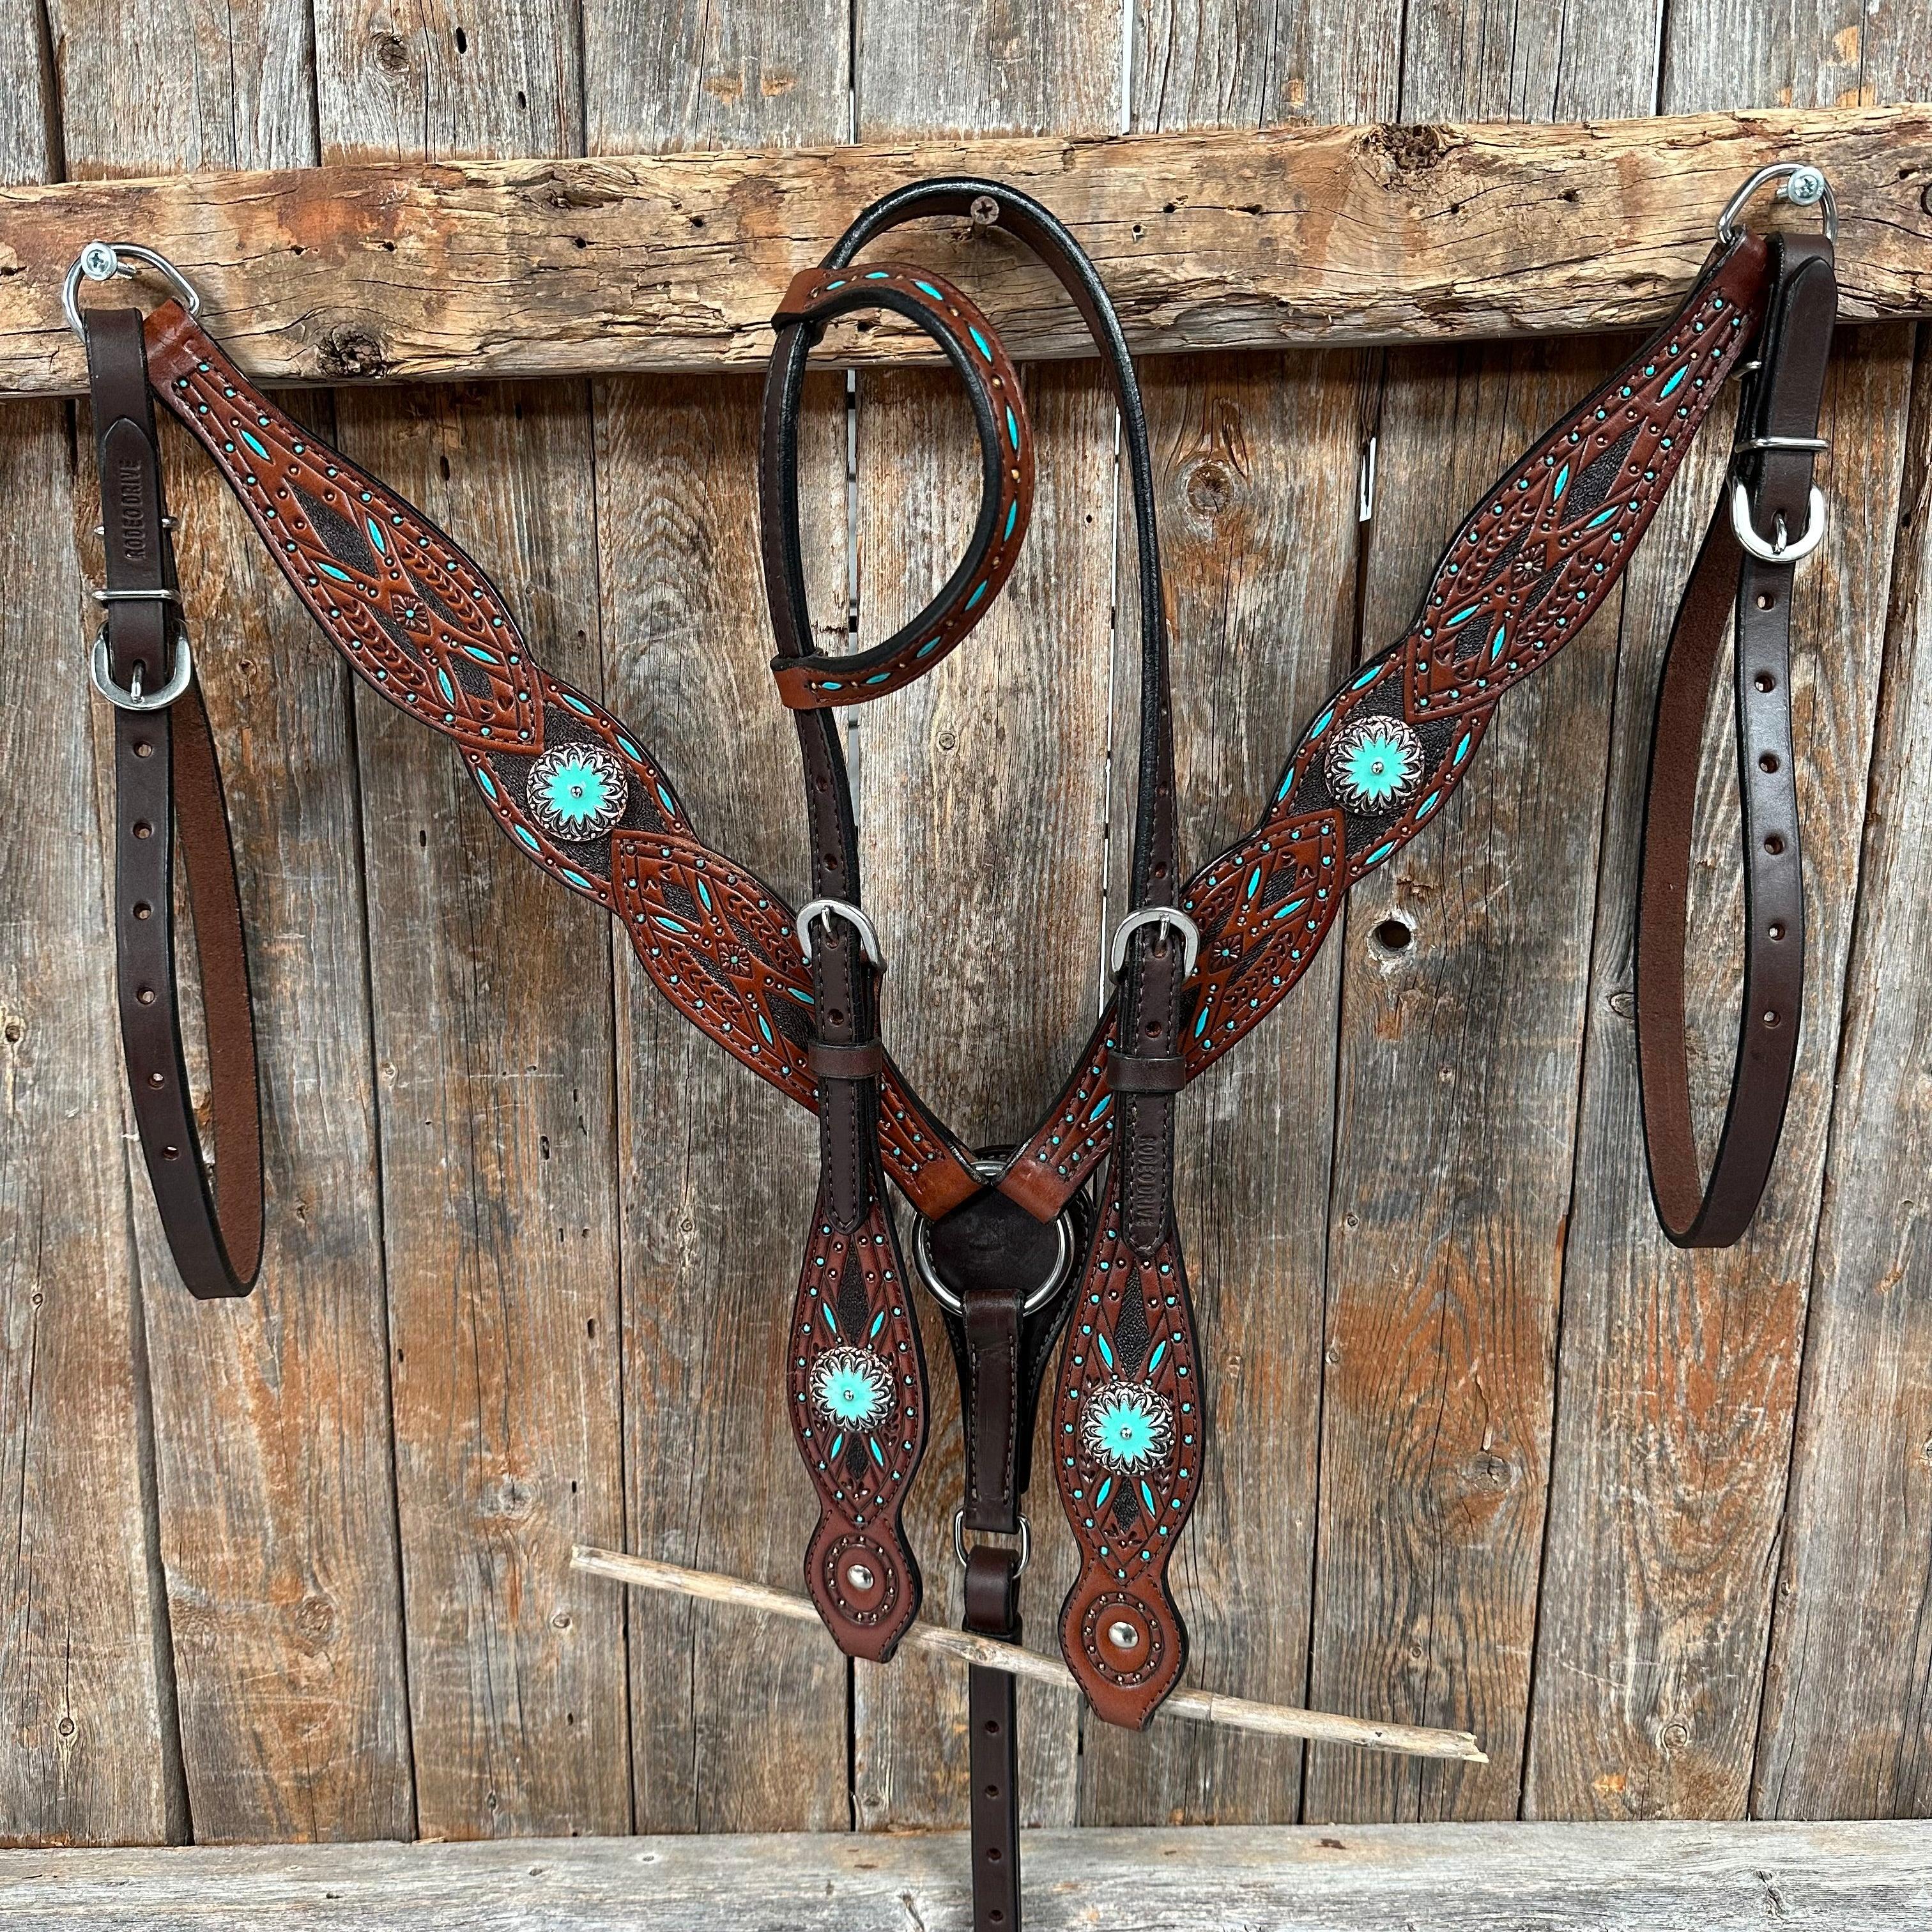 Horsehair Crosstie Bridle in Rodeo Special (by Colorado Horsehair) - Canyon  Creek Saddlery & Dry Goods Co.